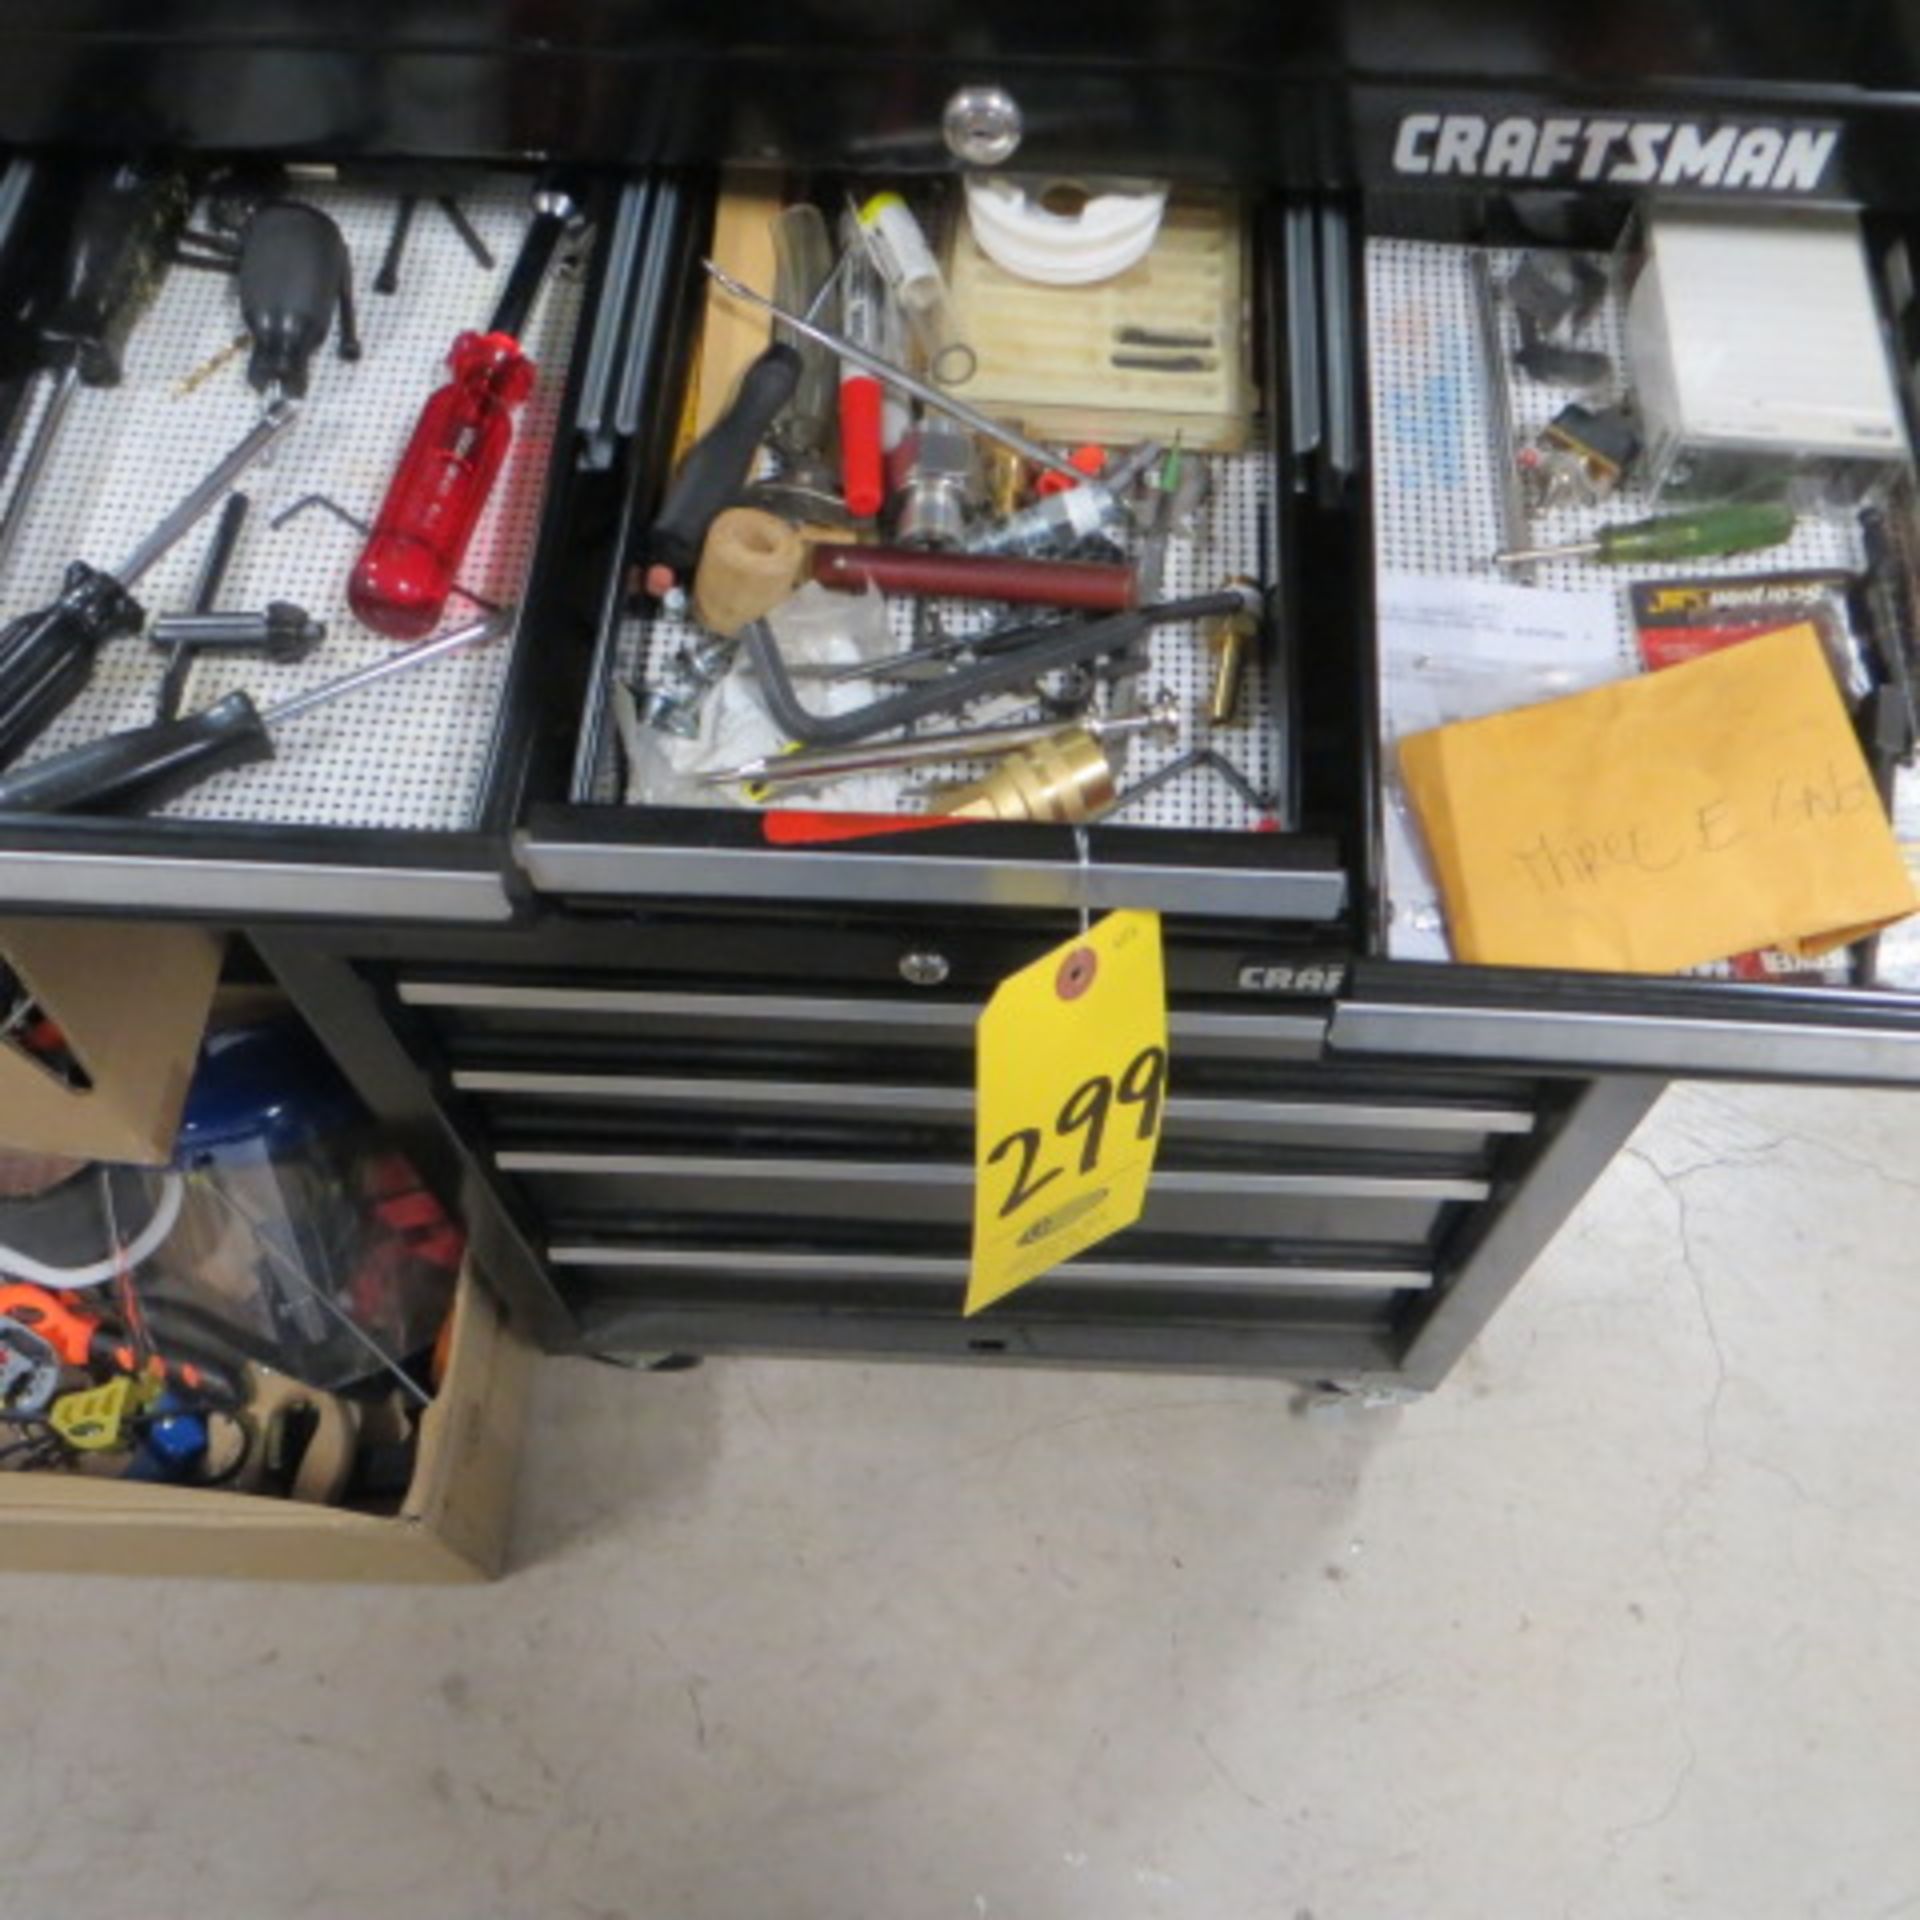 CRAFTSMAN TOOL BOX AND CONTENTS - Image 2 of 7